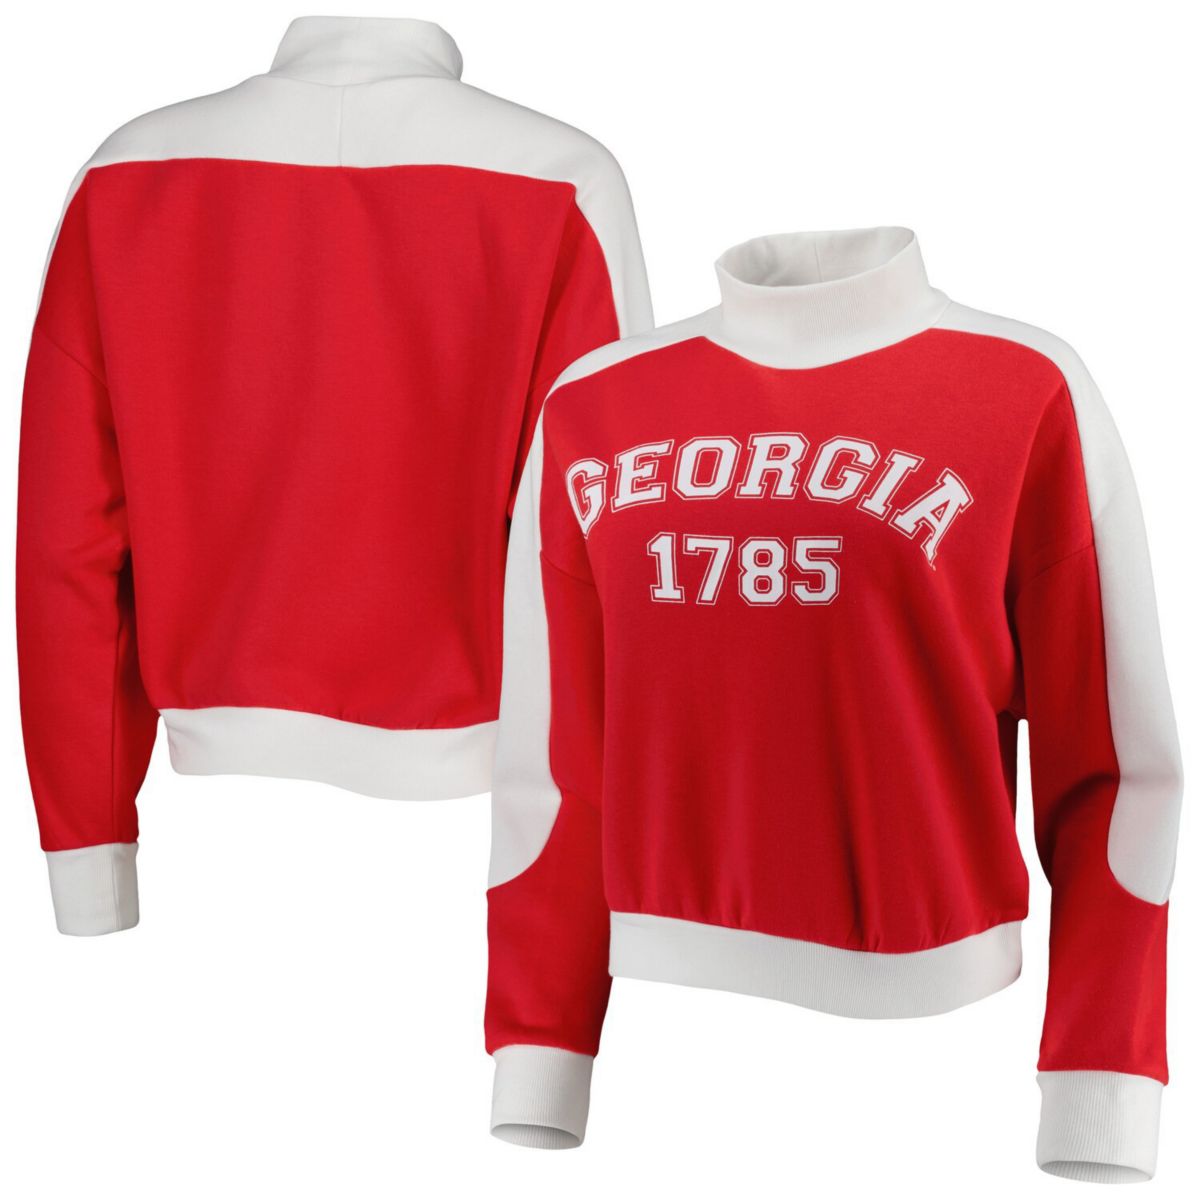 Women's Gameday Couture Red Georgia Bulldogs Make it a Mock Sporty Pullover Sweatshirt Gameday Couture